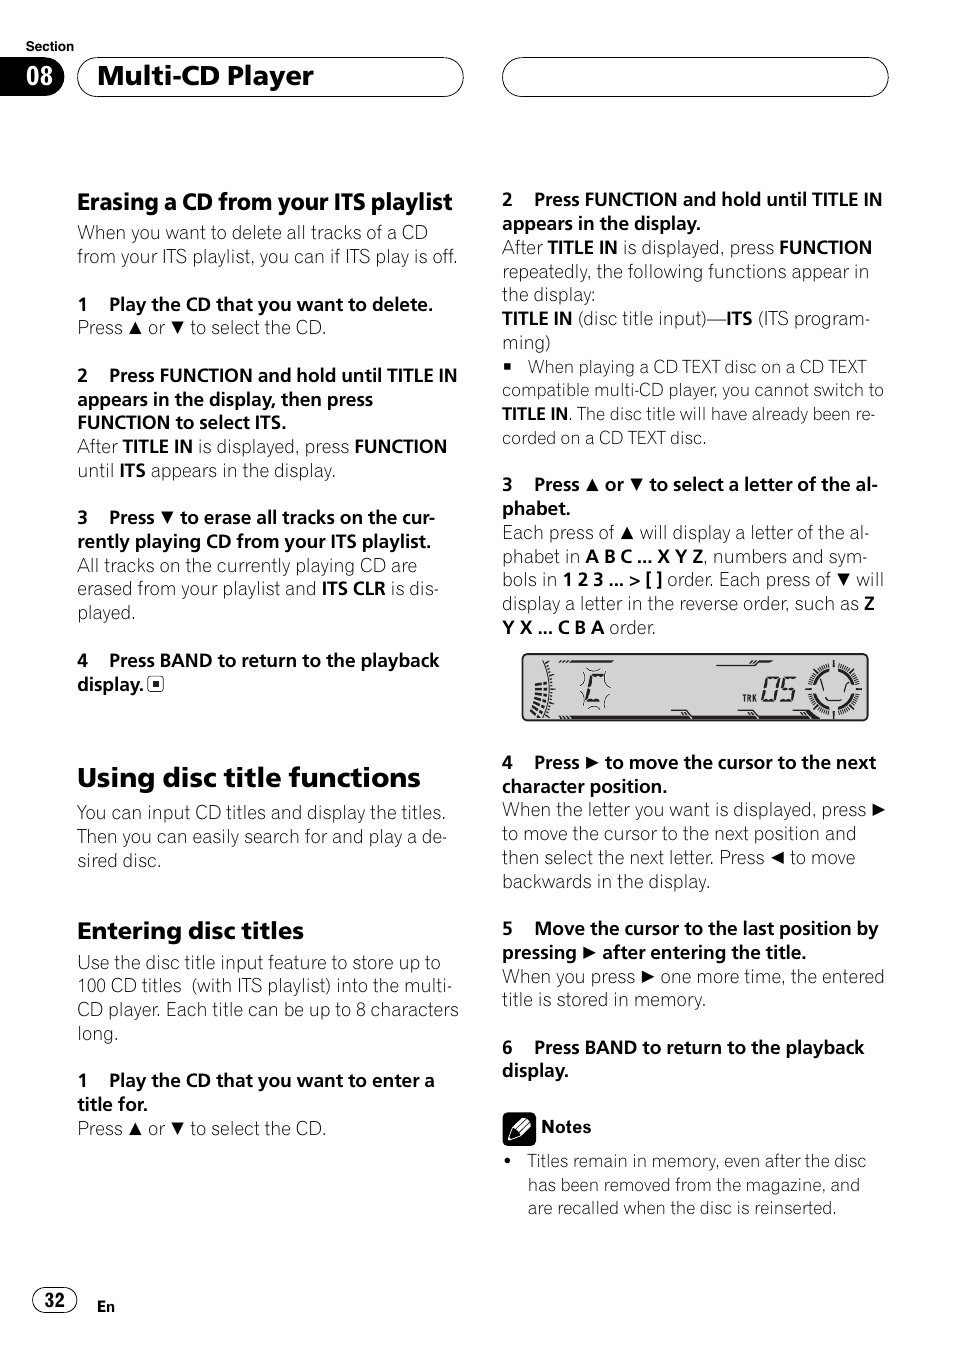 Erasing a cd from your its, Playlist 32, Using disc title functions 32 | Entering disc titles 32, Using disc title functions, Multi-cd player, Erasing a cd from your its playlist, Entering disc titles | Pioneer DEH-P6700MP User Manual | Page 32 / 108